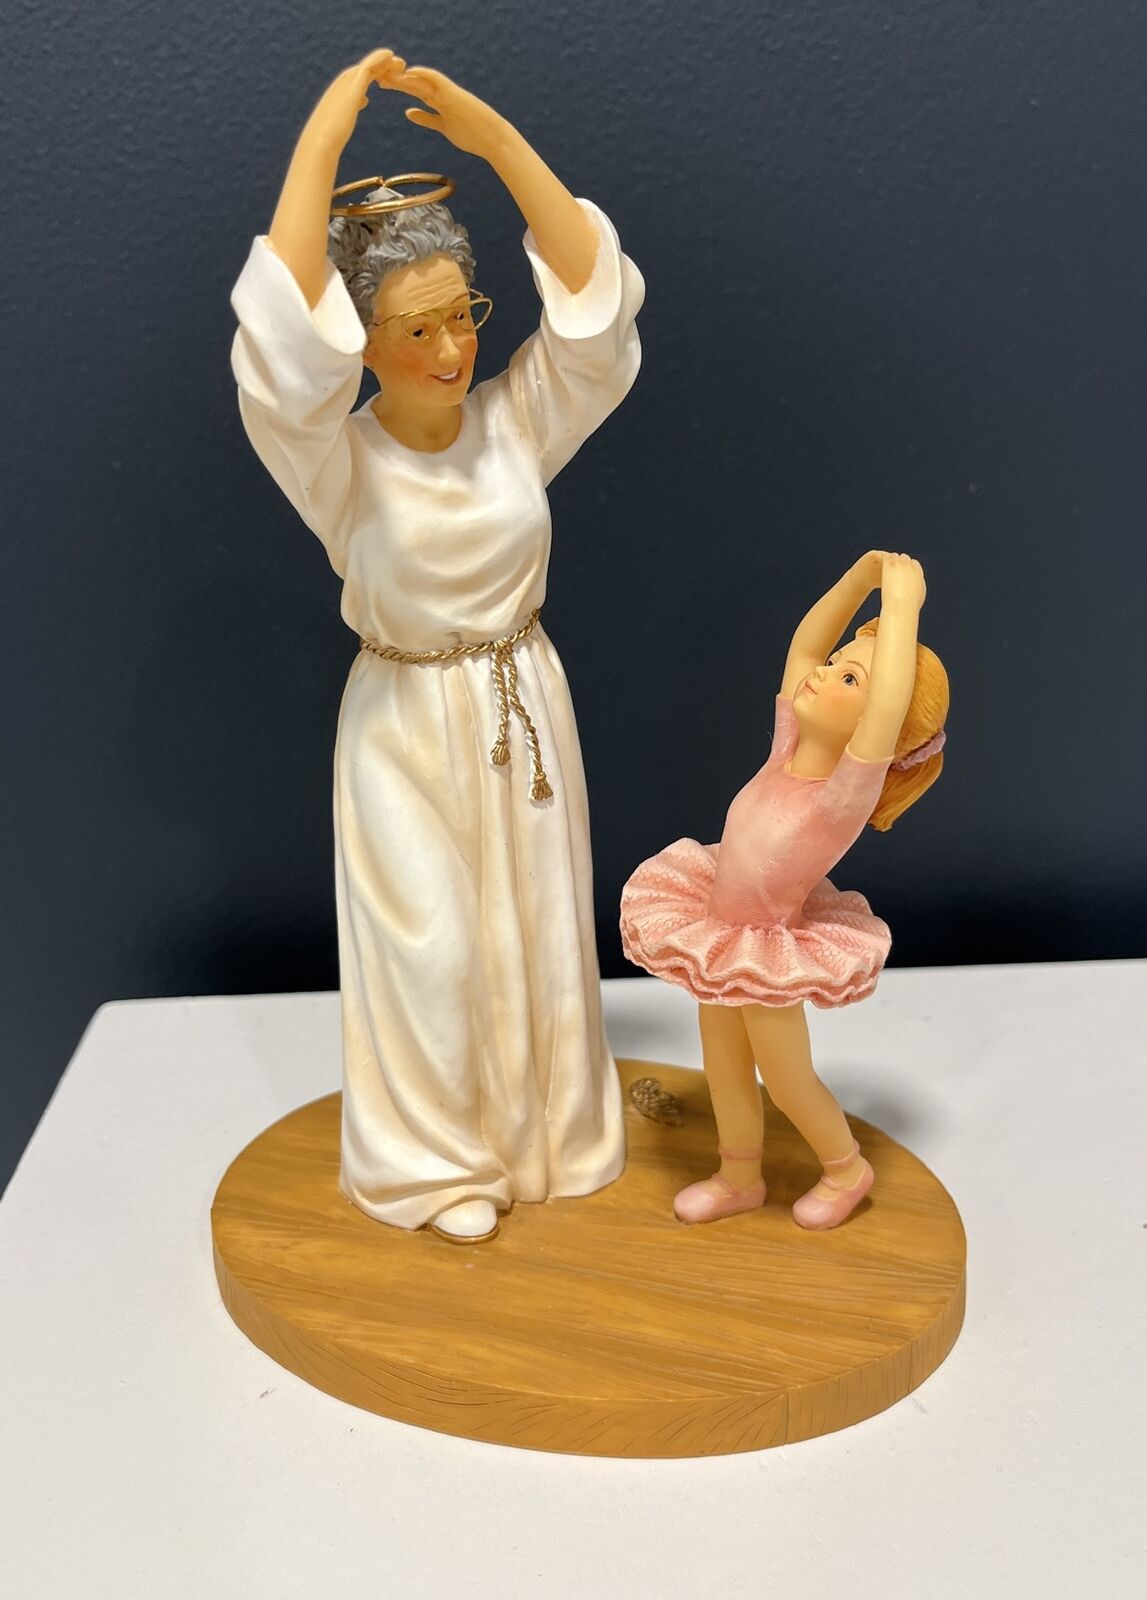 2001 ARTISAN Flair ALMOST ANGLES - Dancing For The Lord - Ballerina Figurine